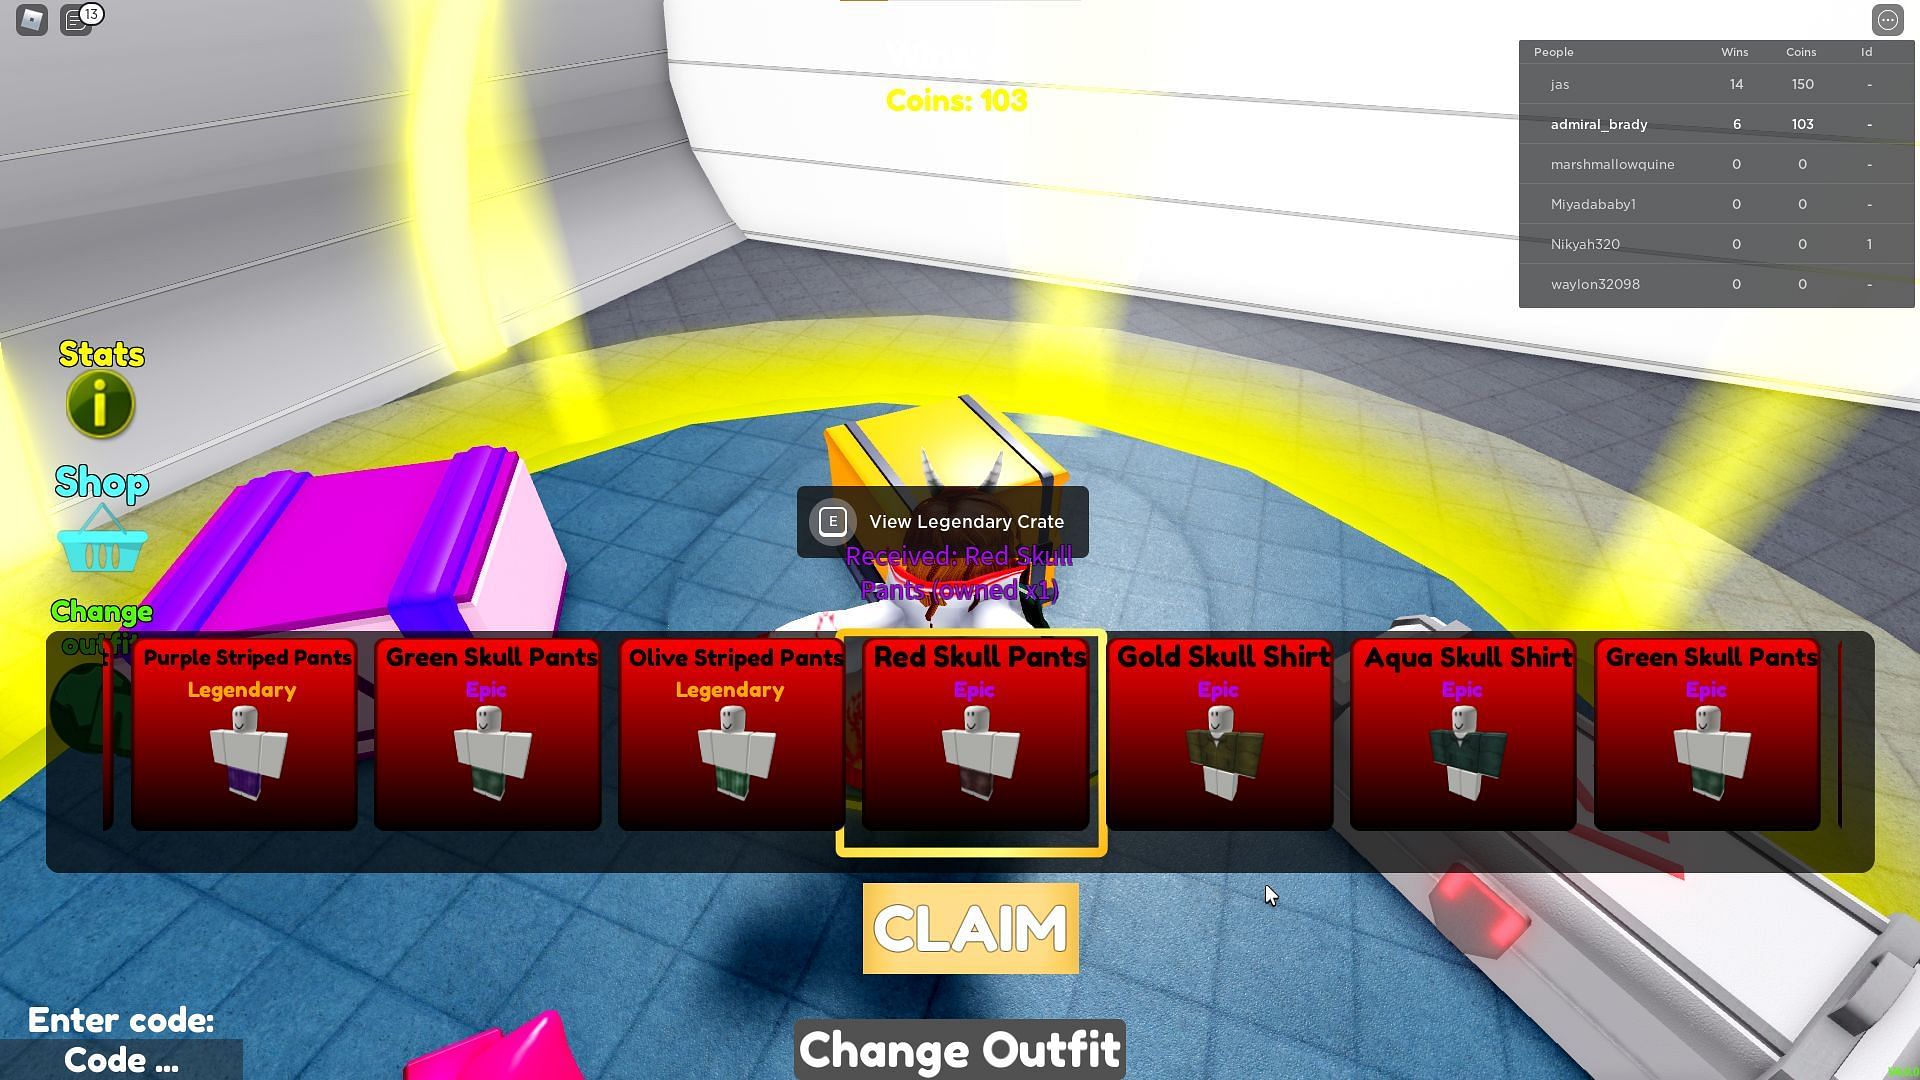 How to obtain a Squid Game X outfit in Roblox